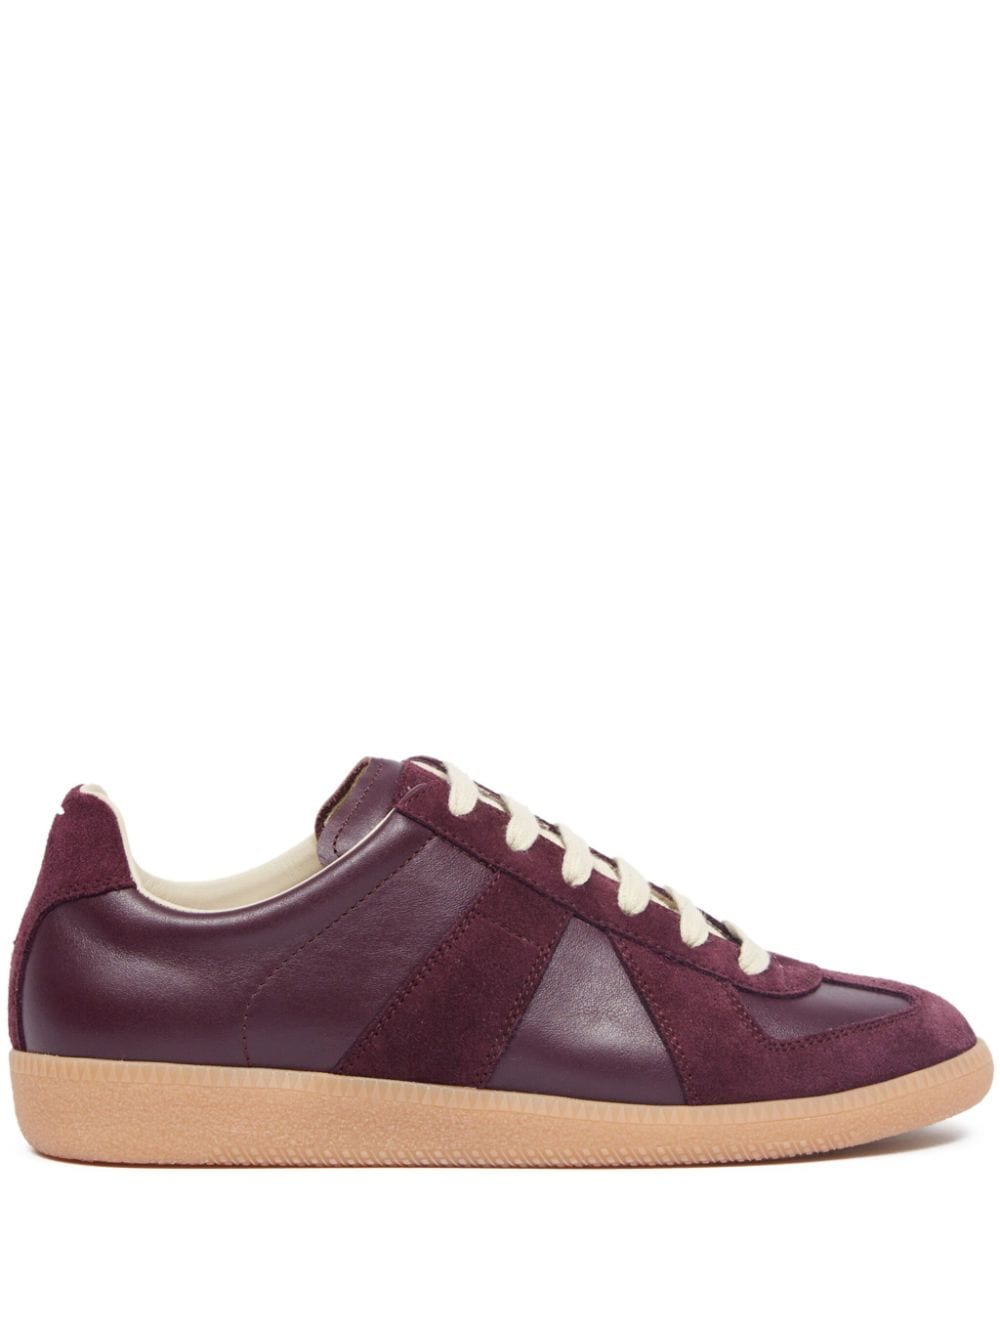 Replica low-top leather sneakers